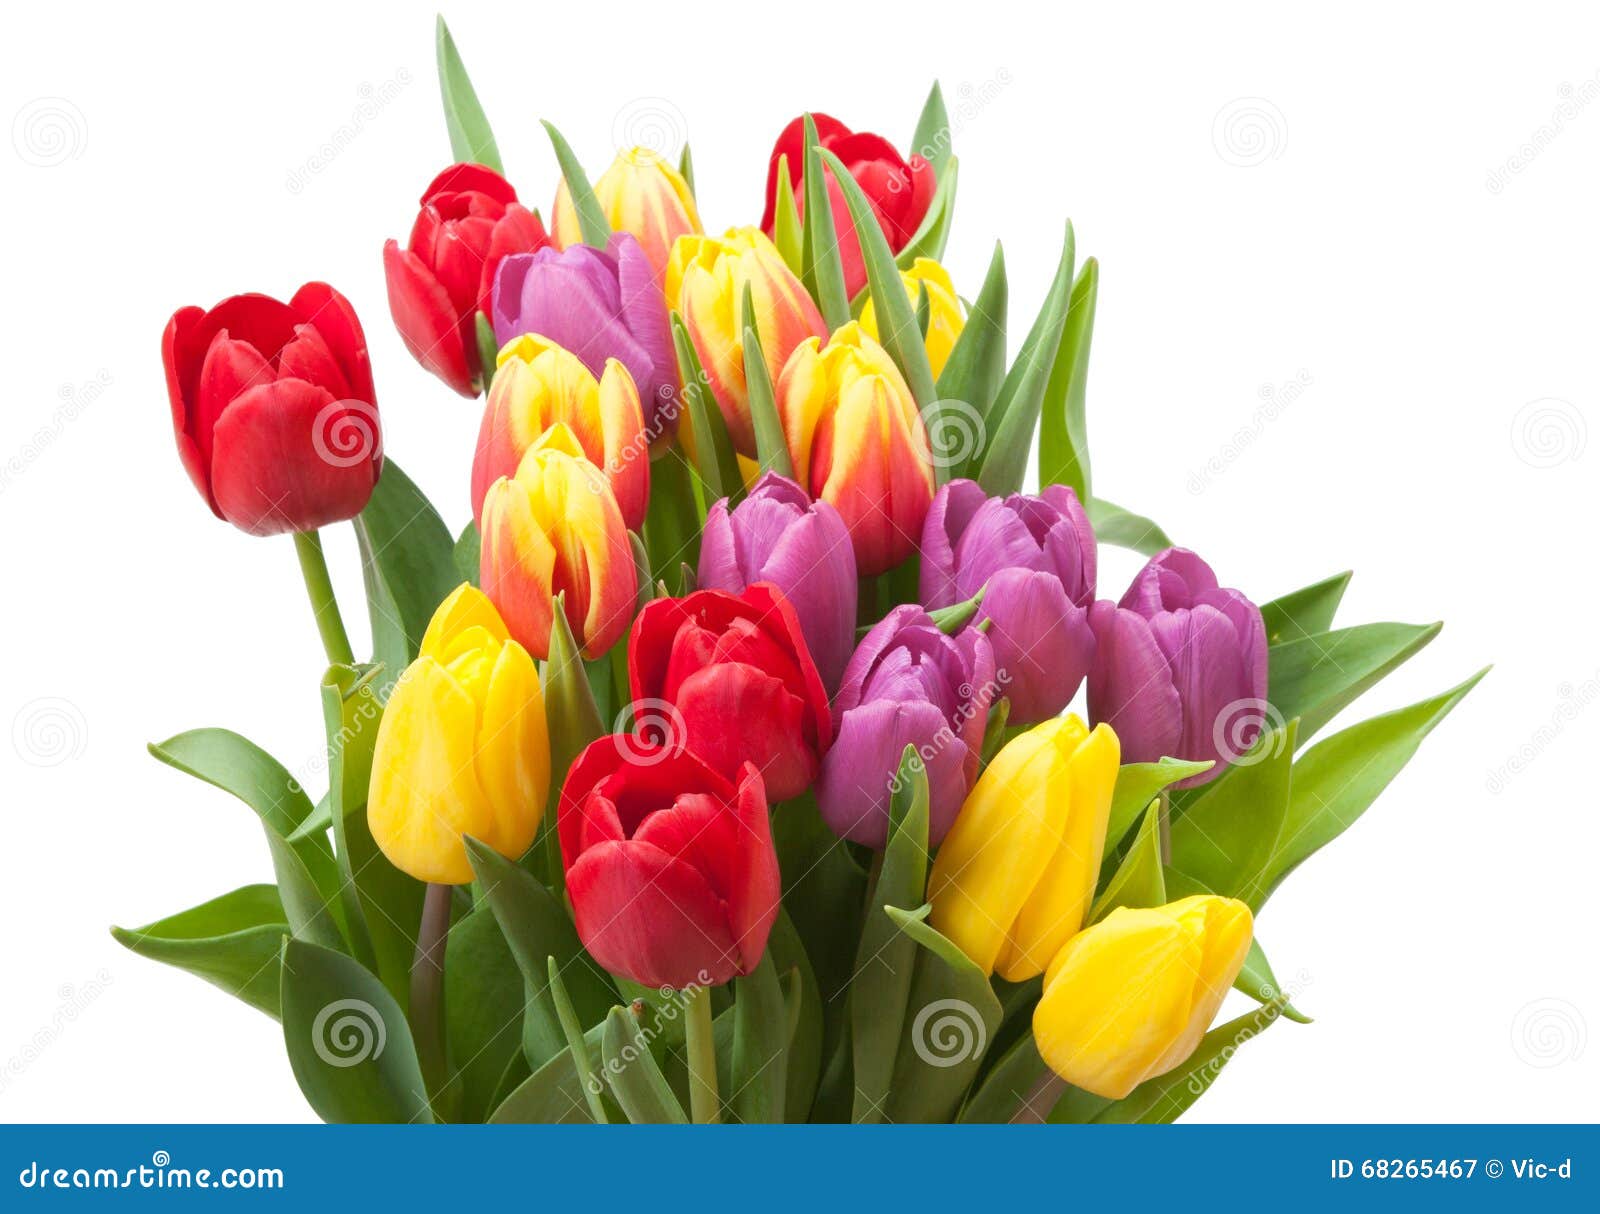 Assorted Tulips Bouquet. Isolated on White Background Stock Image ...